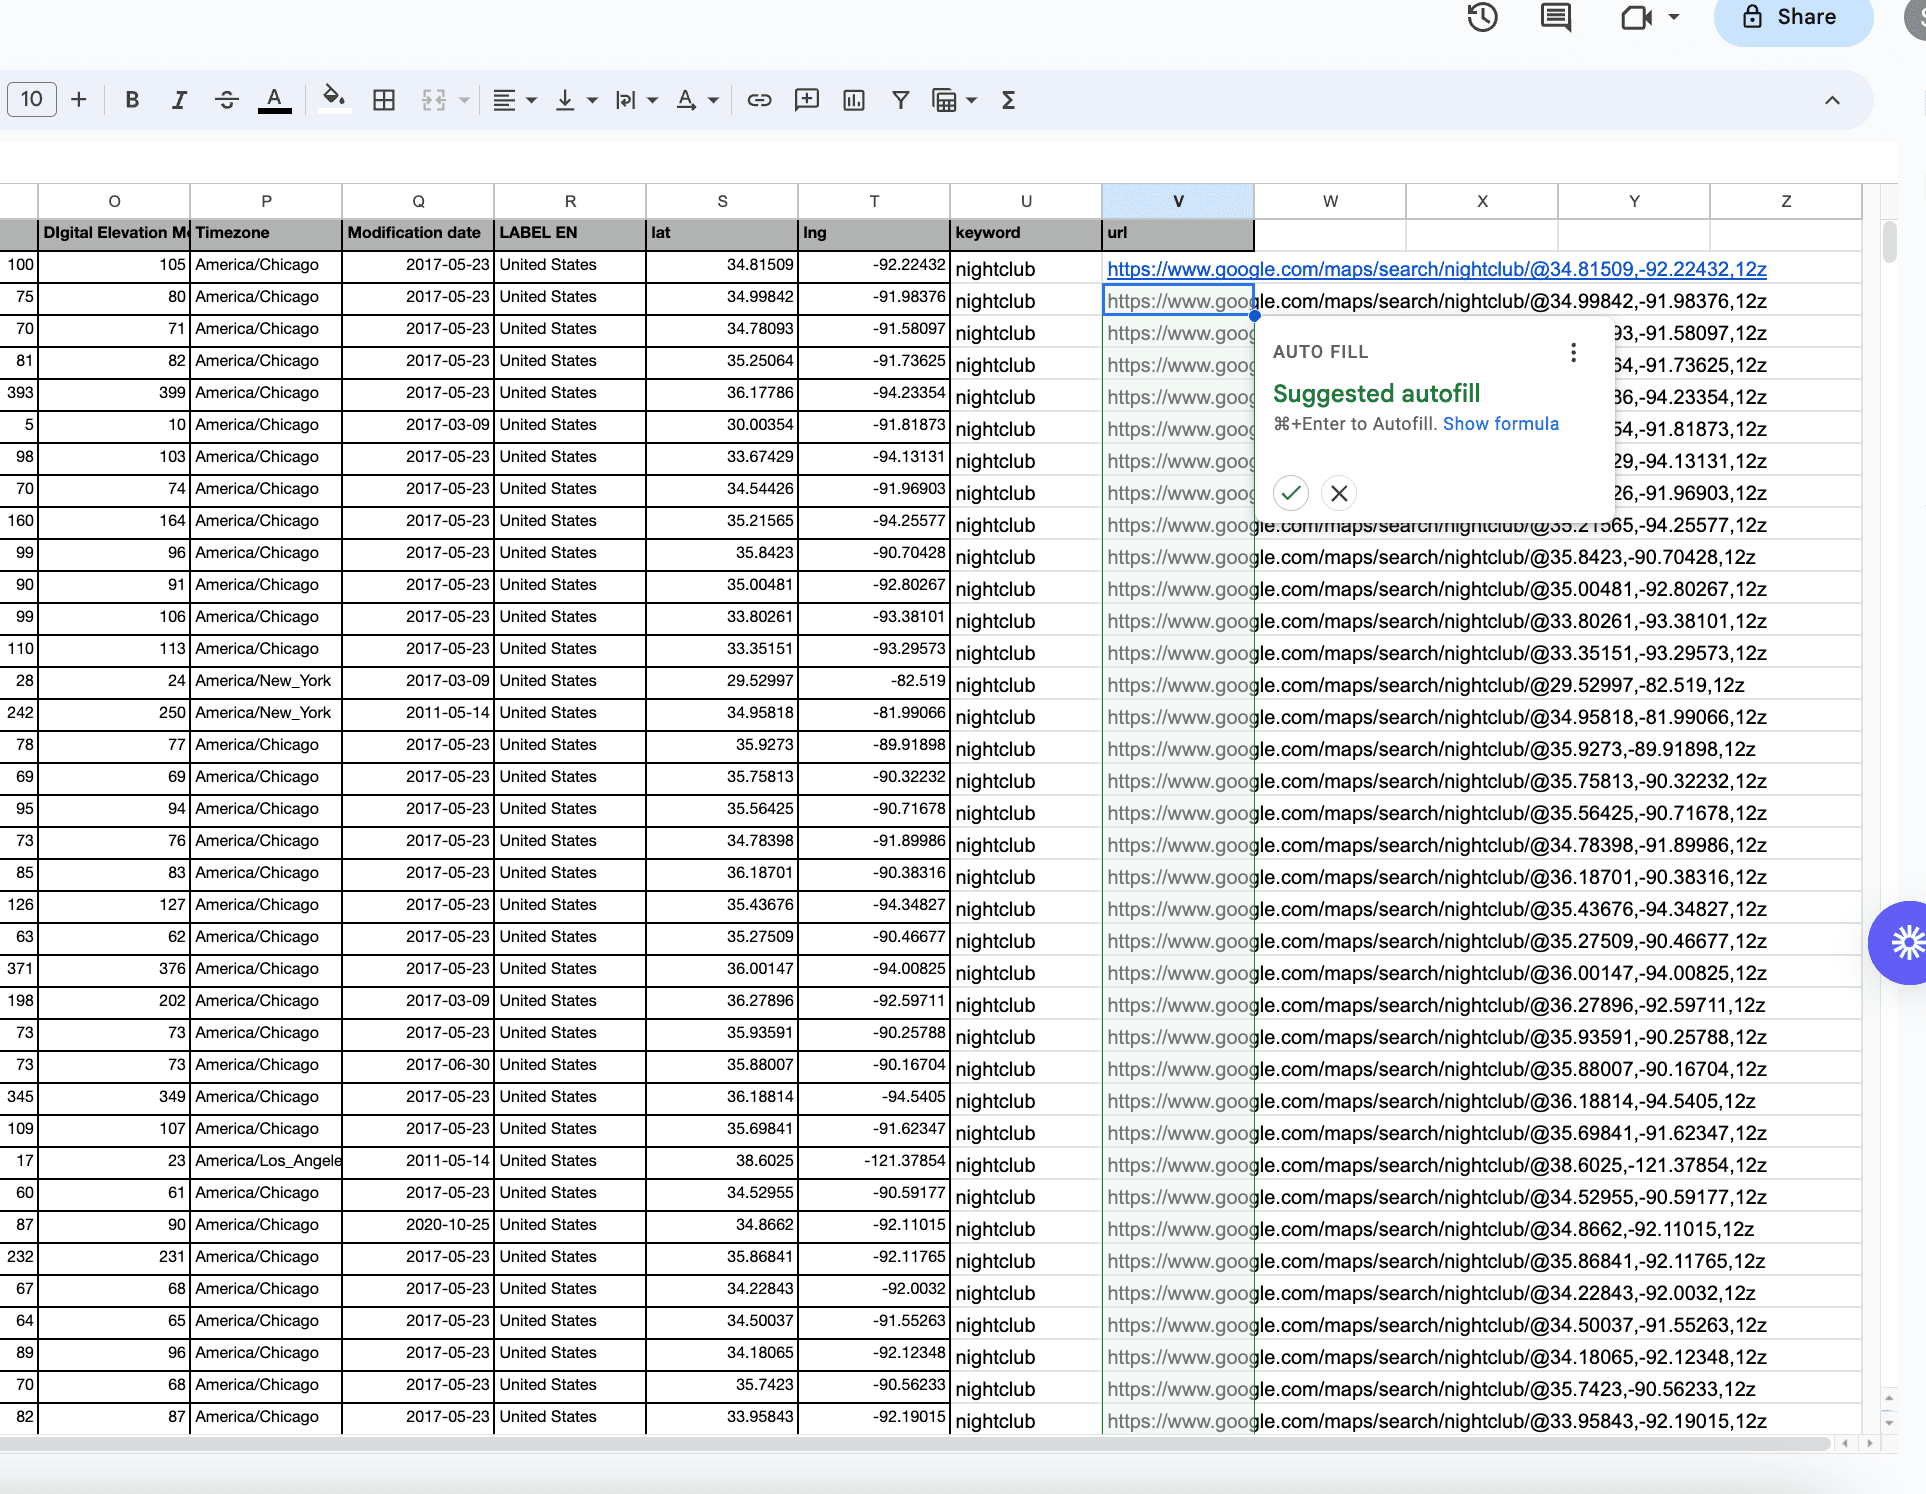 autofill in googlesheet to generate google maps search urls.png